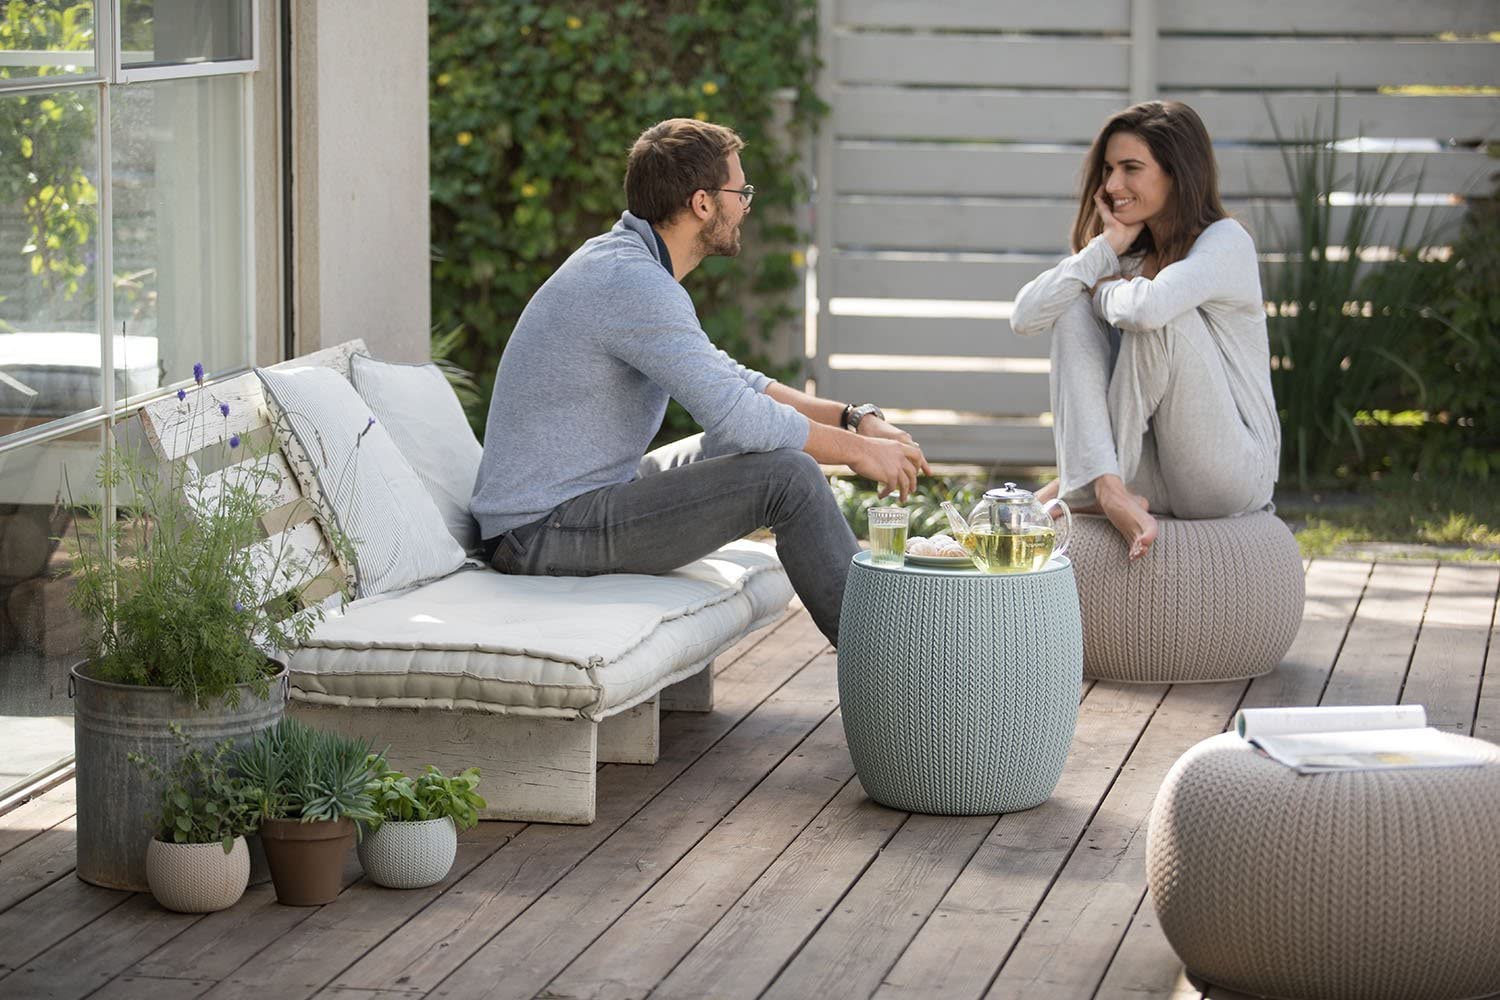 Keter-Urban-Knit-1 15 Unique Furniture Designs for Outdoor Small Spaces